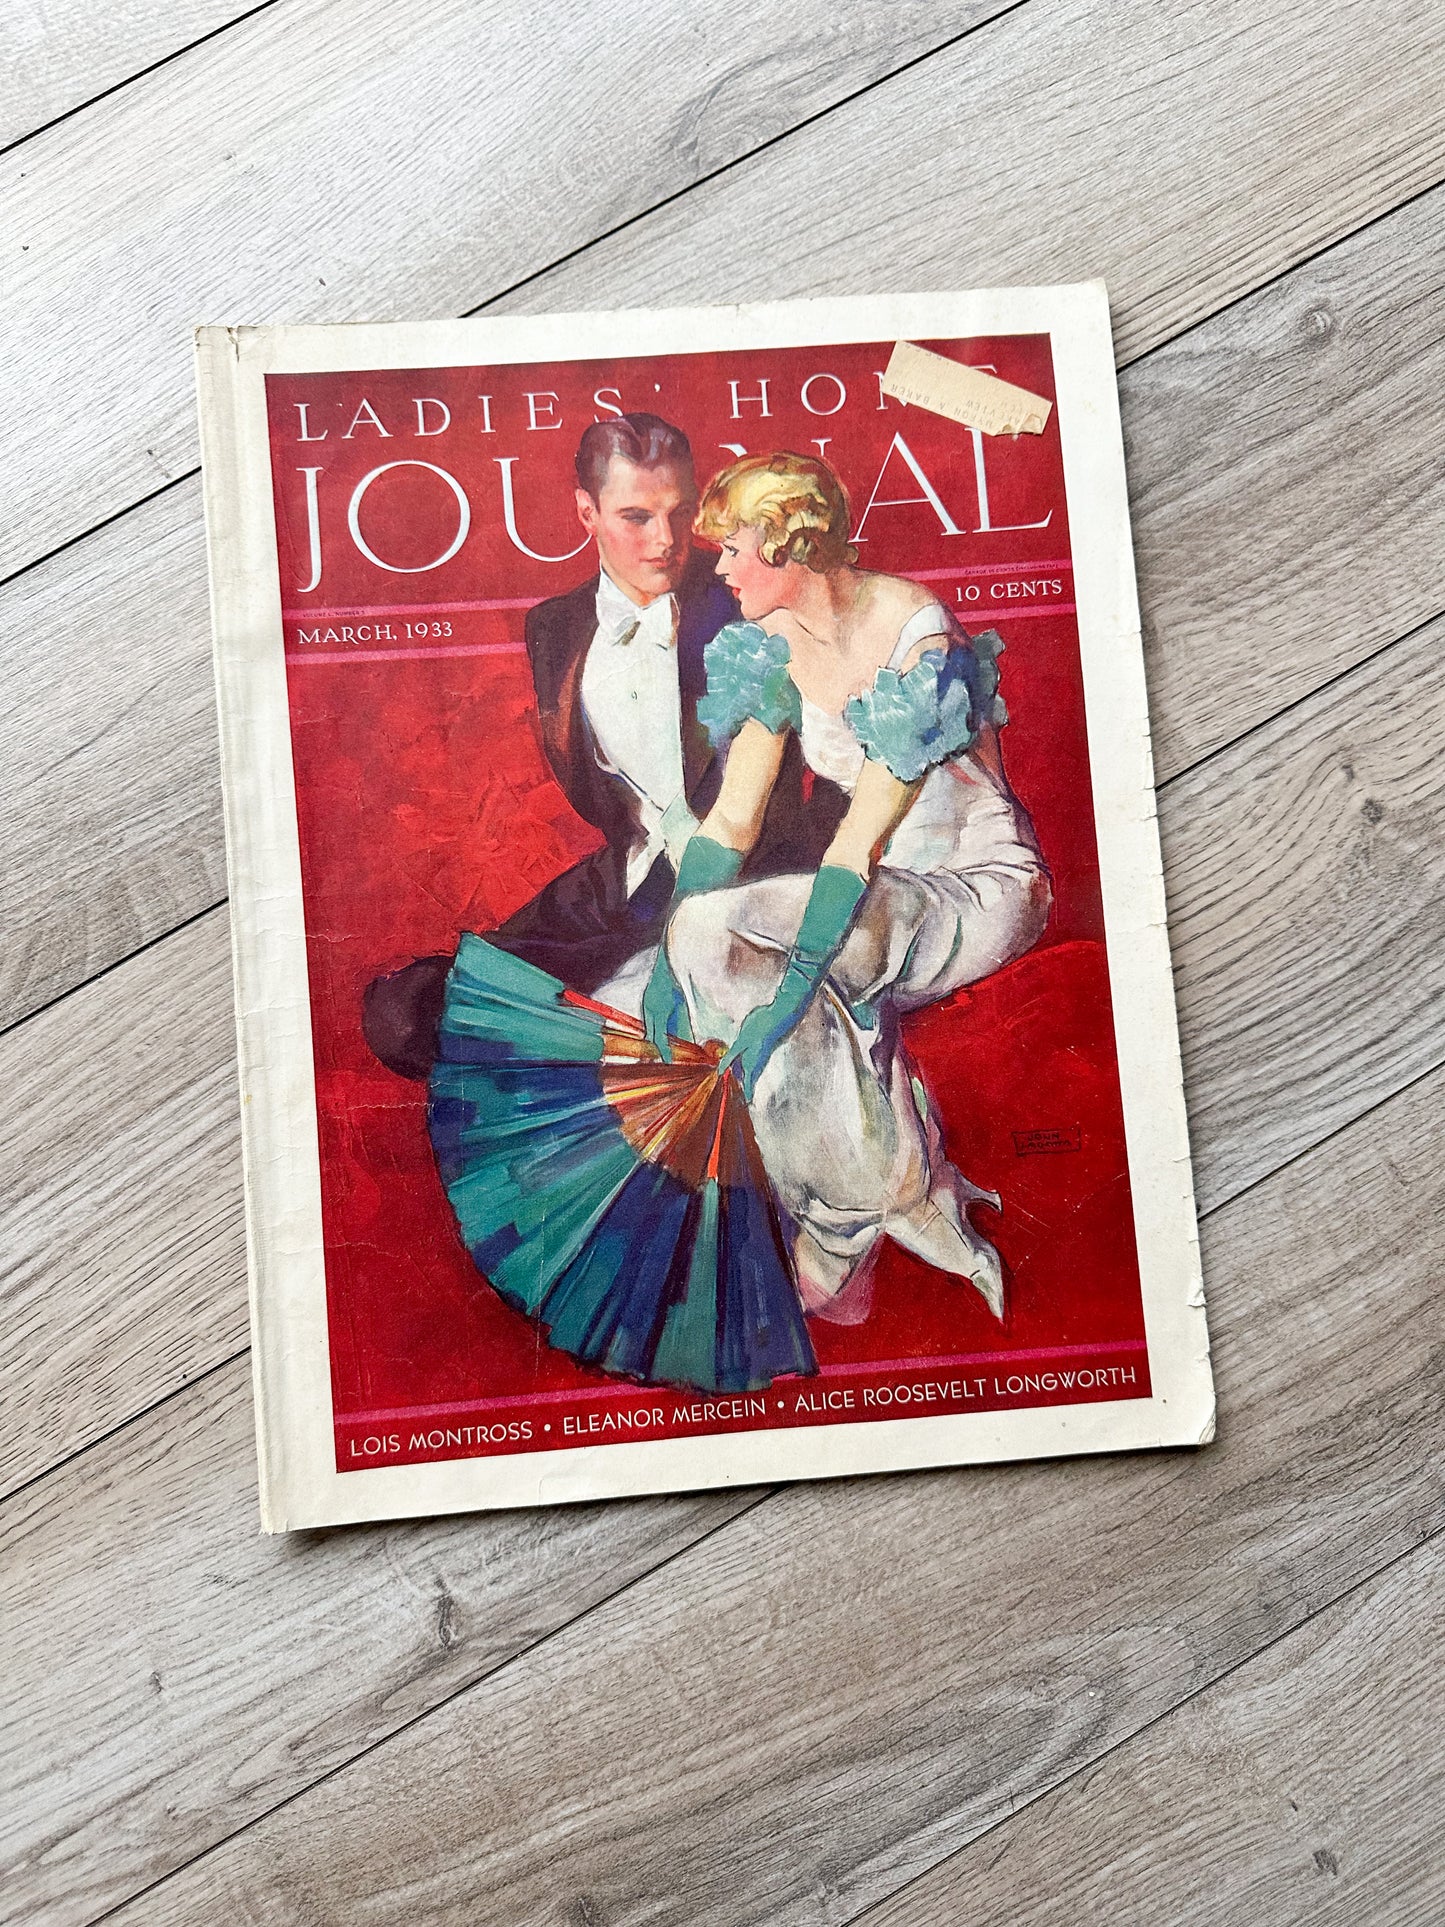 The Ladies Home Journal